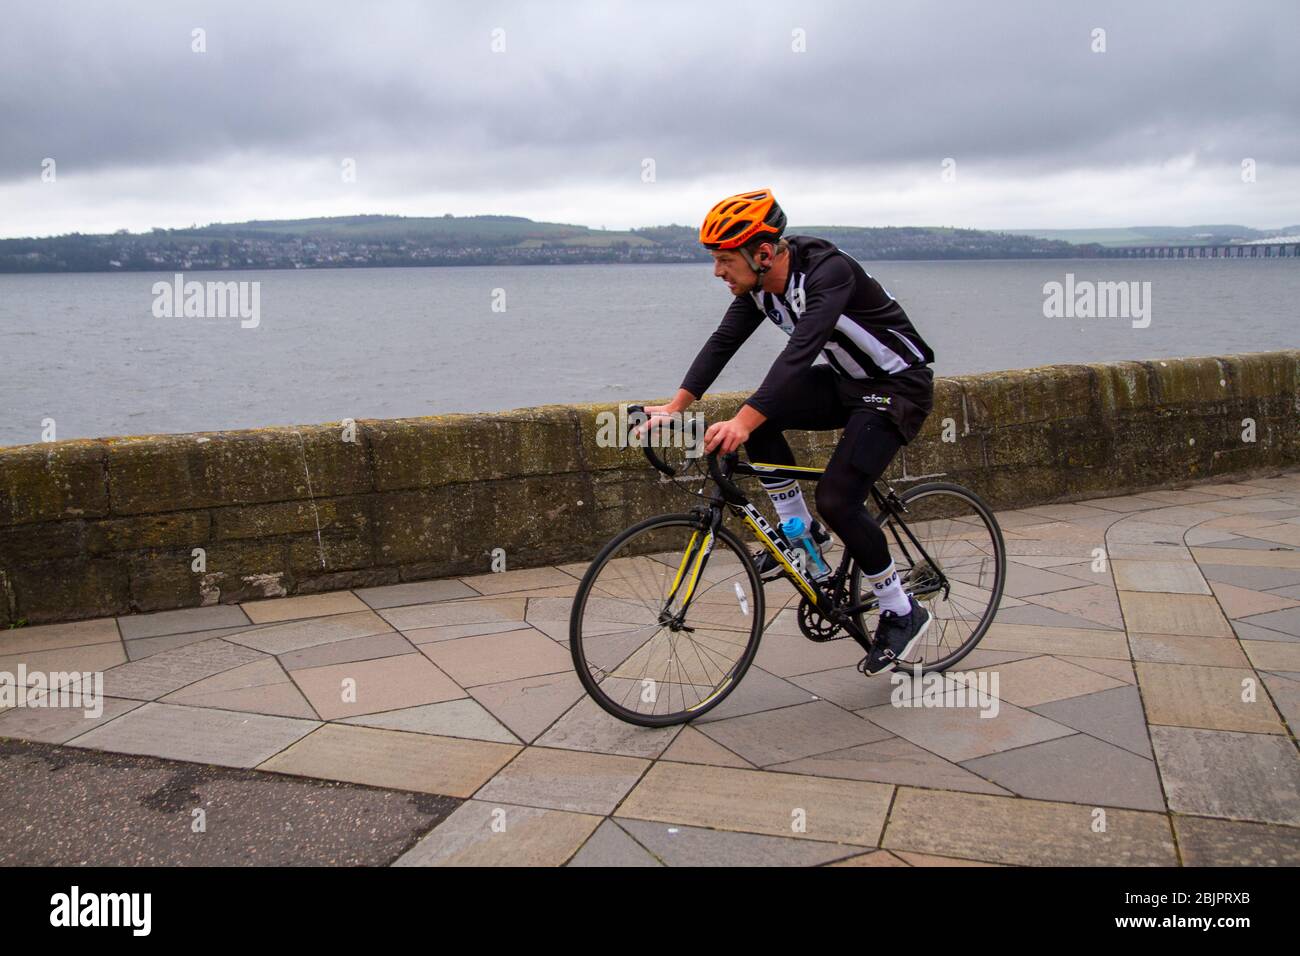 Dundee, Tayside, Scotland, UK. 30th Apr, 2020. UK Weather: A blustery cold and cloudy morning in Dundee with temperatures reaching 9°C. Local residents take cycling exercises along the waterfront promenade during the Covid-19 lockdown restrictions throughout Scotland. Credit: Dundee Photographics/Alamy Live News Stock Photo